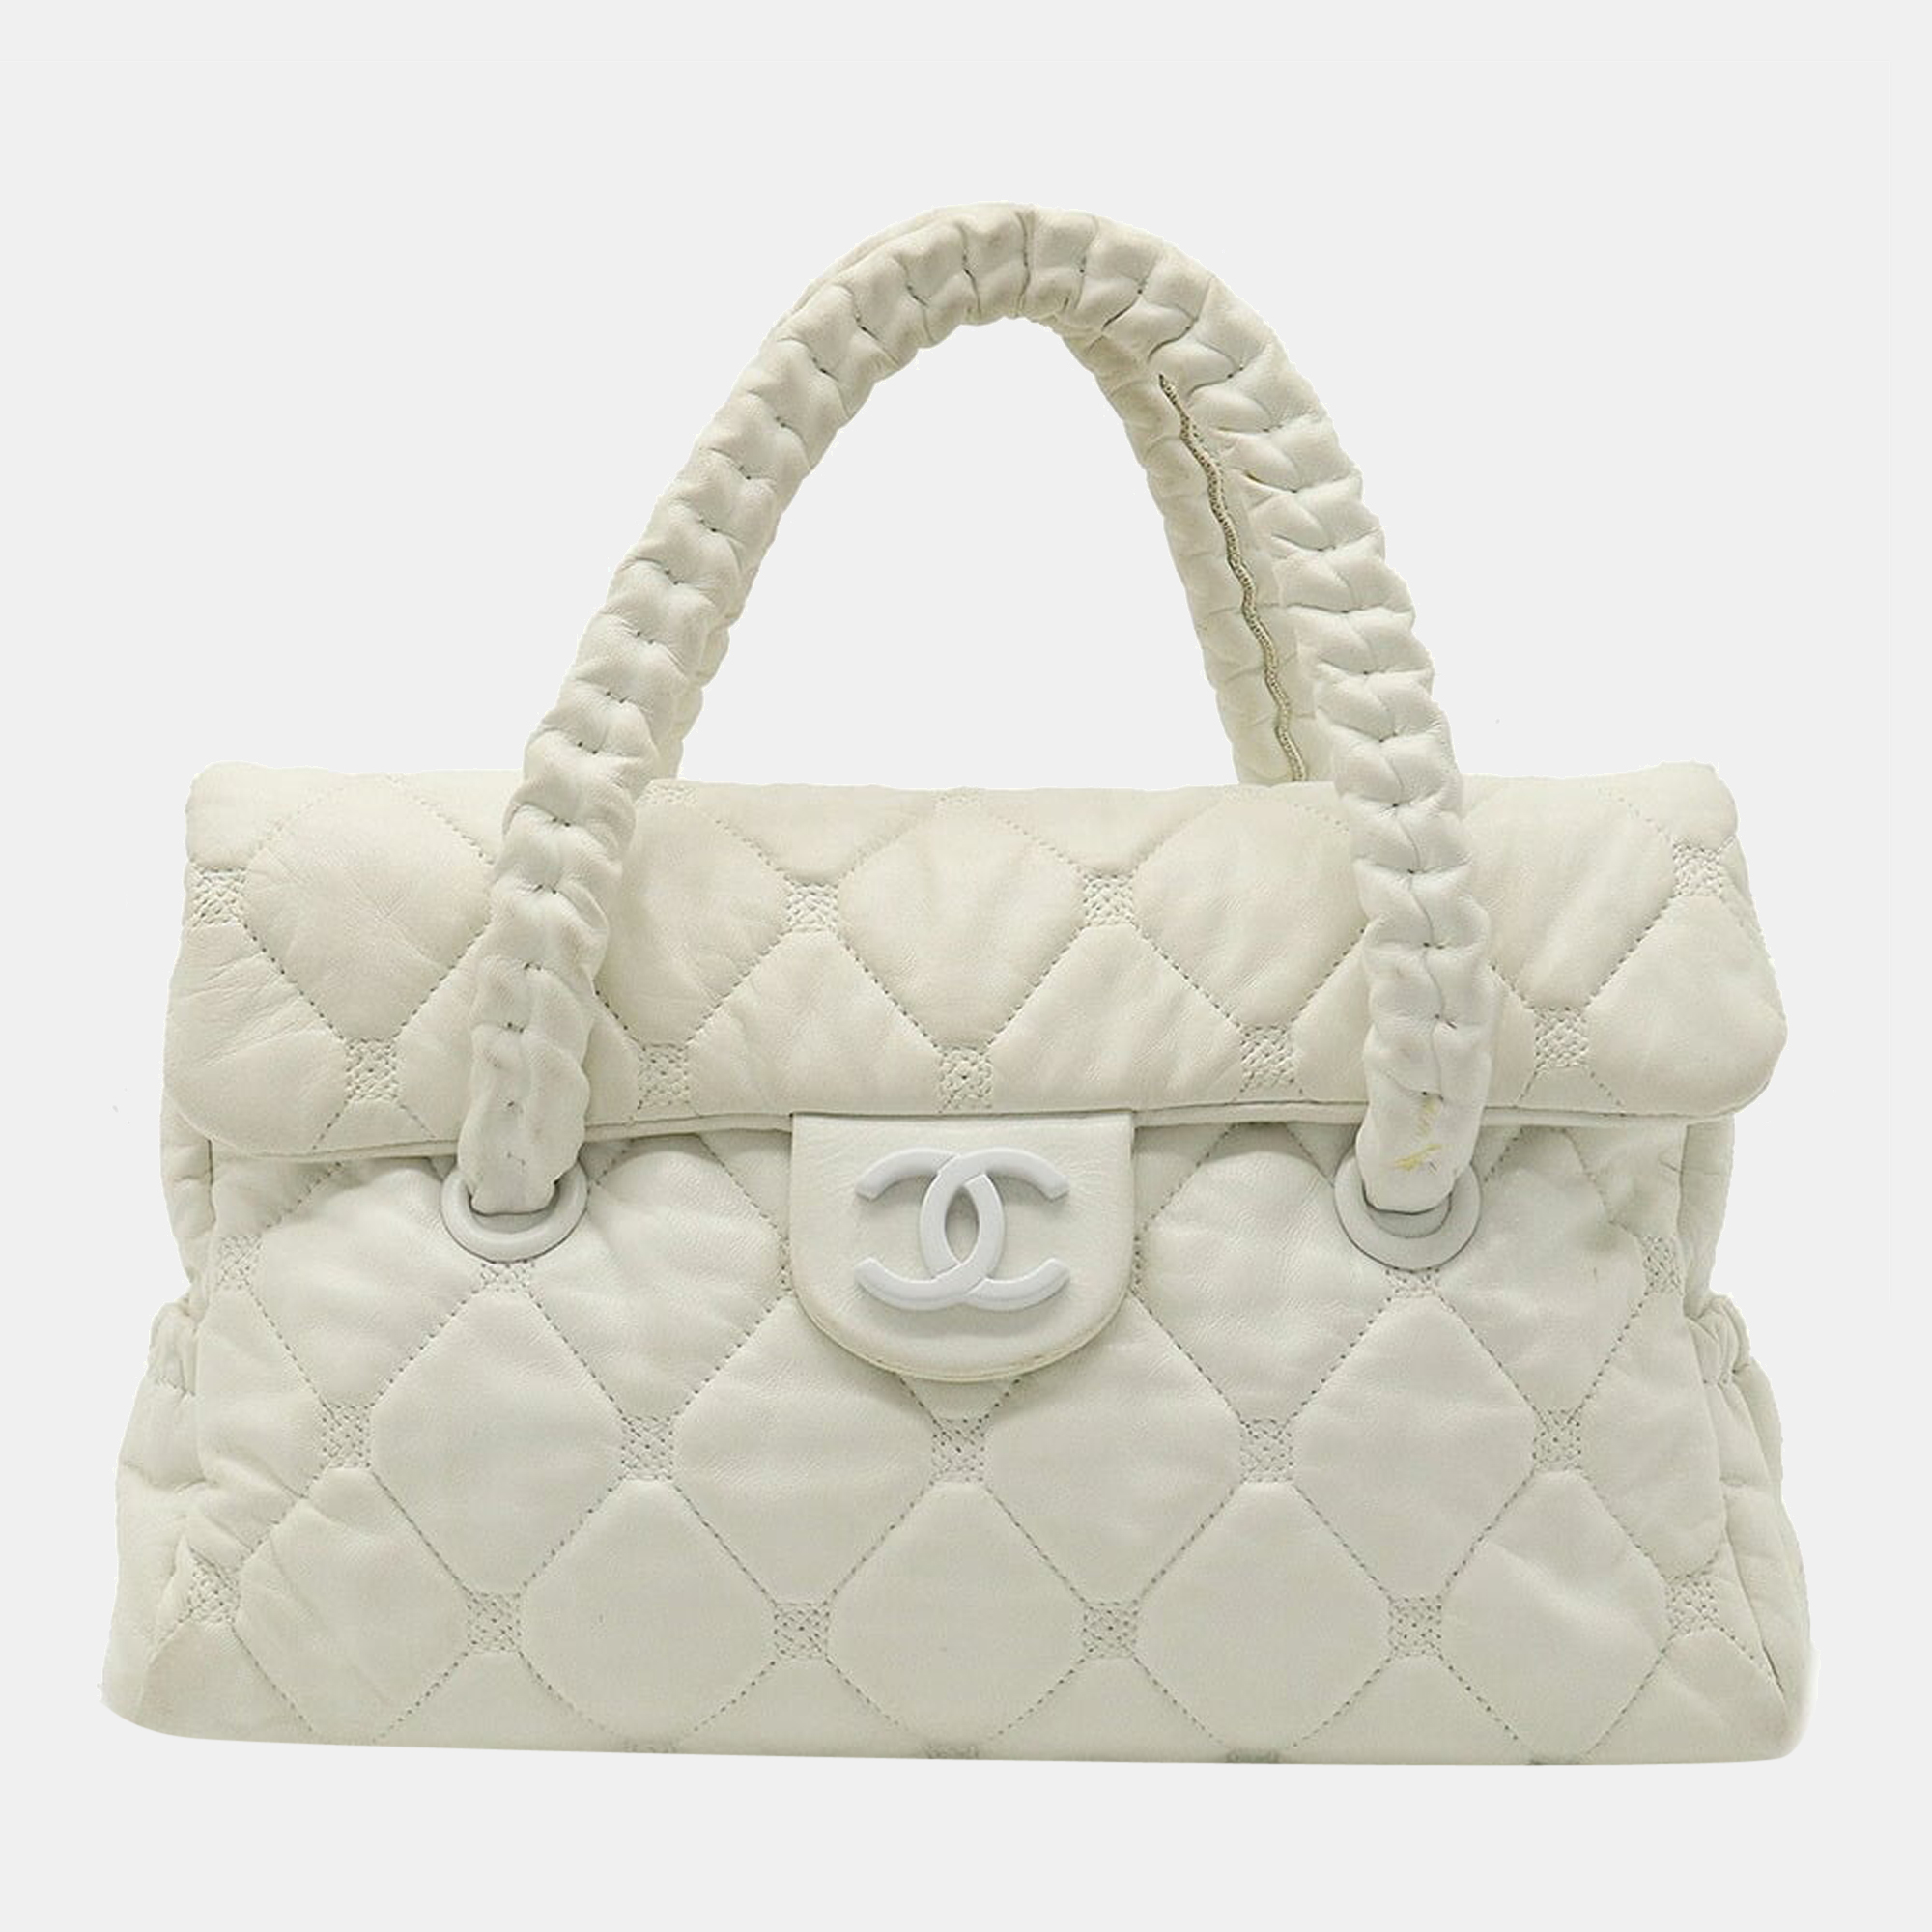 Chanel white lambskin leather woven cc shoulder bag